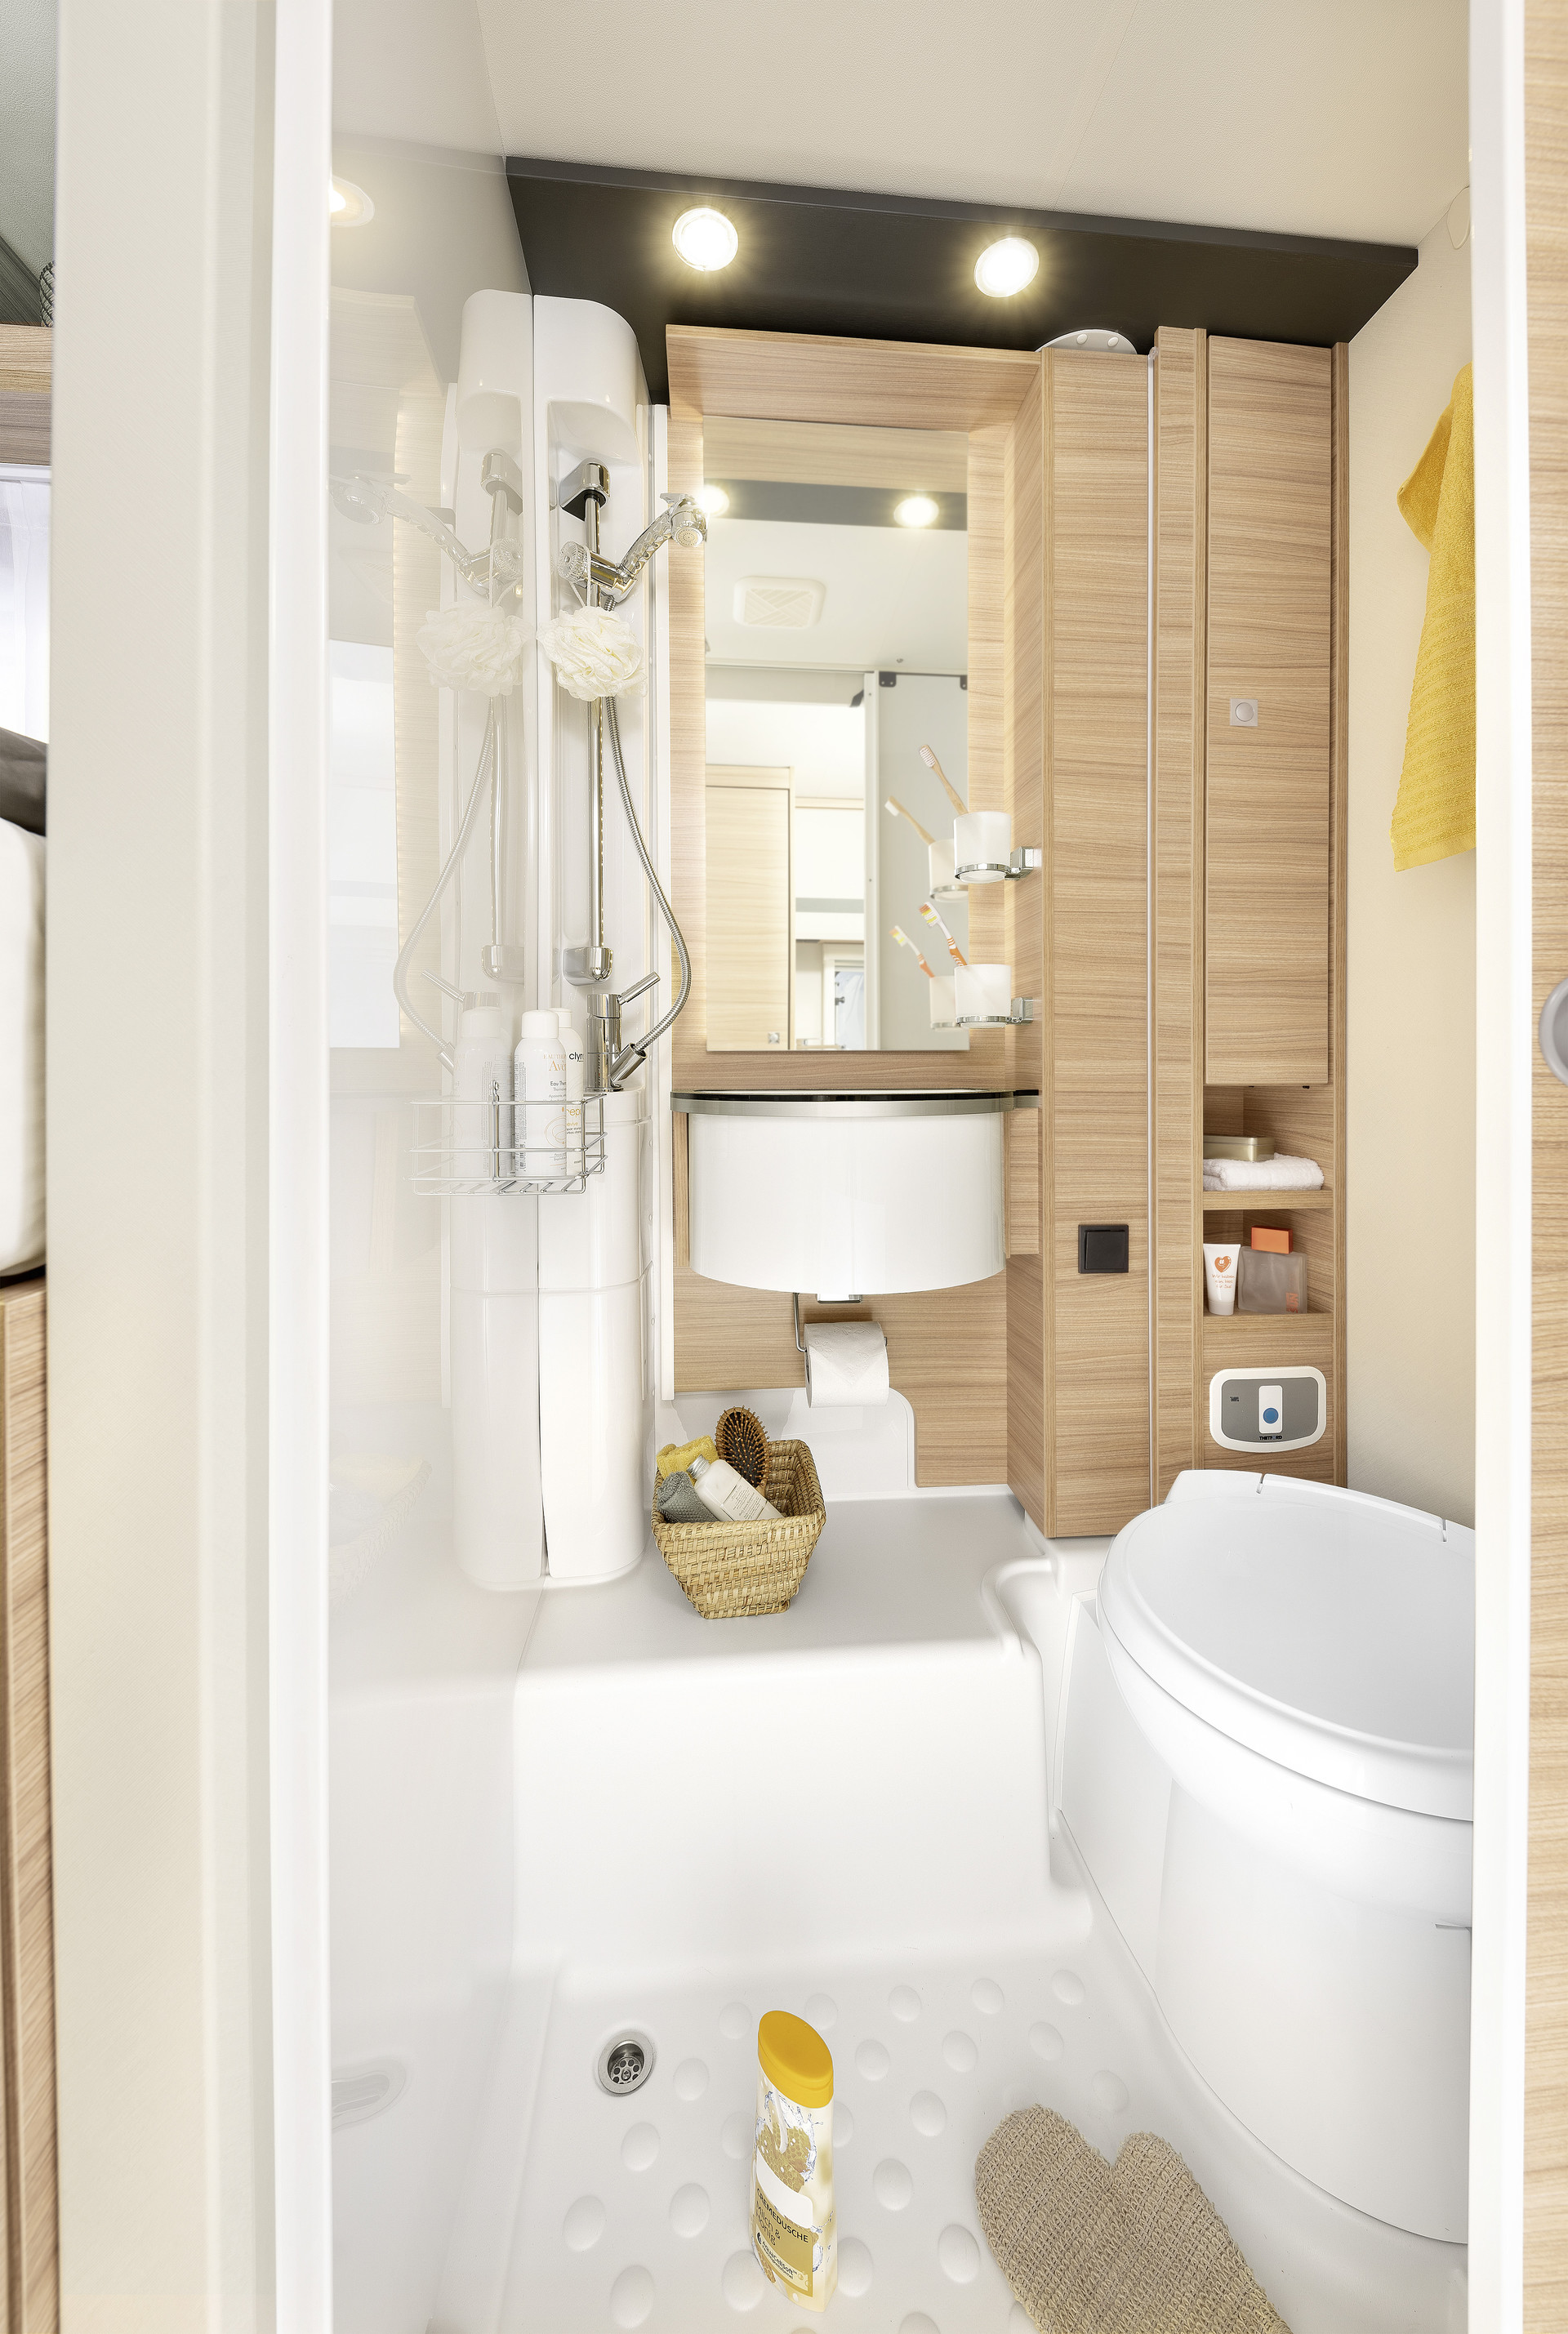 The T / I 6 comes with a roomy, separate shower, an easy-to-access sink and lots of storage space • T/I 6